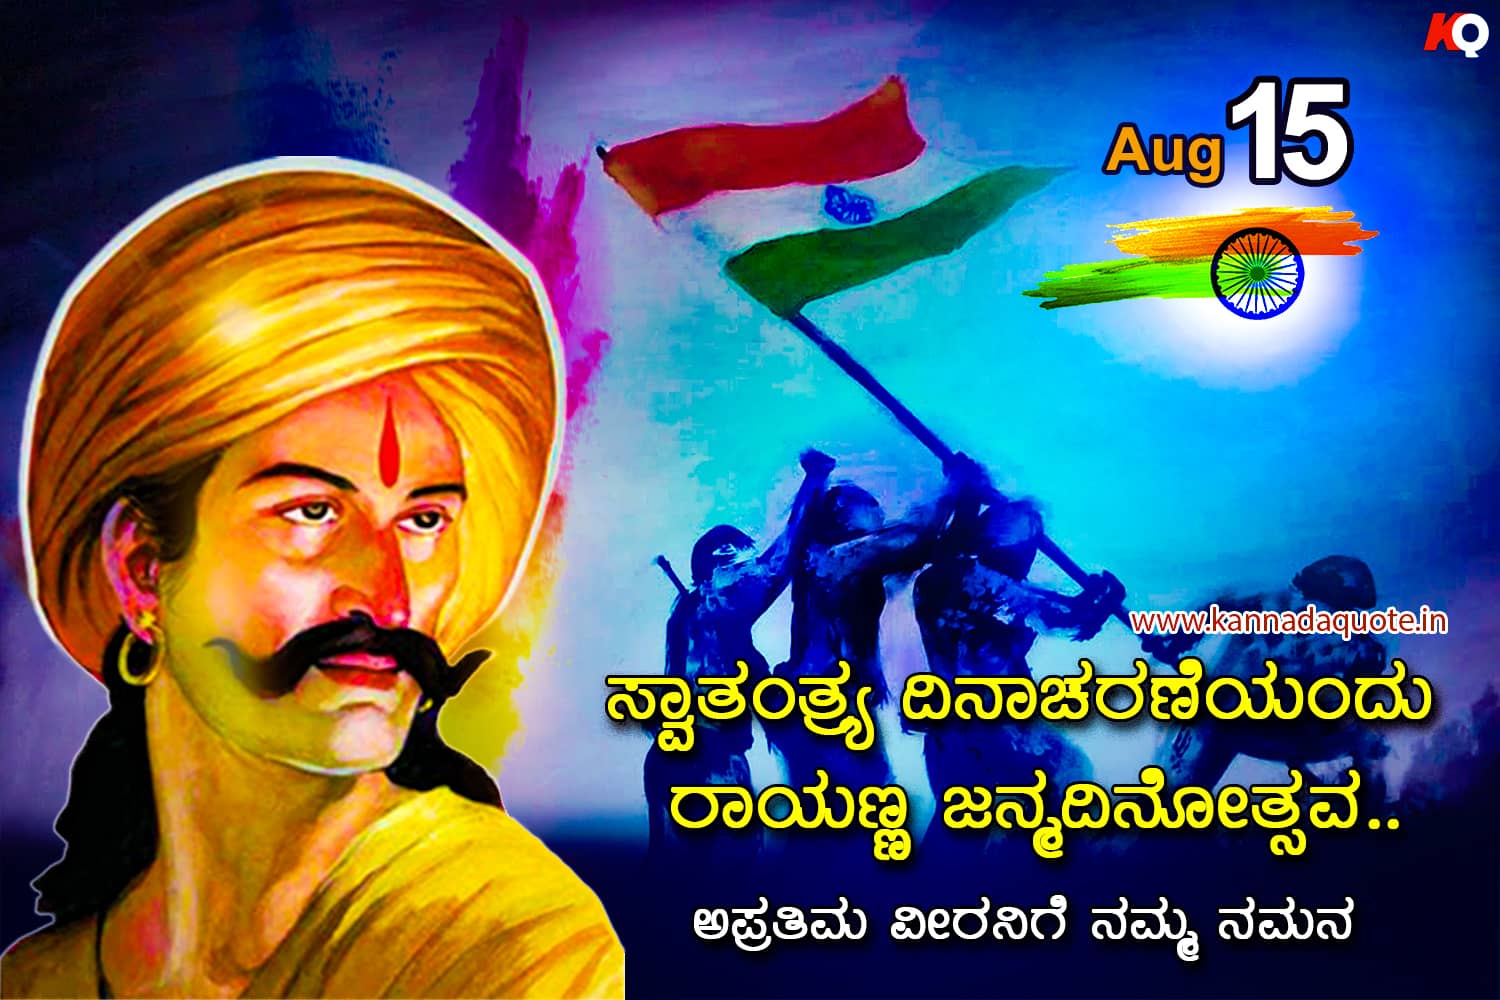 Sangolli Rayanna wishes in kannada with images